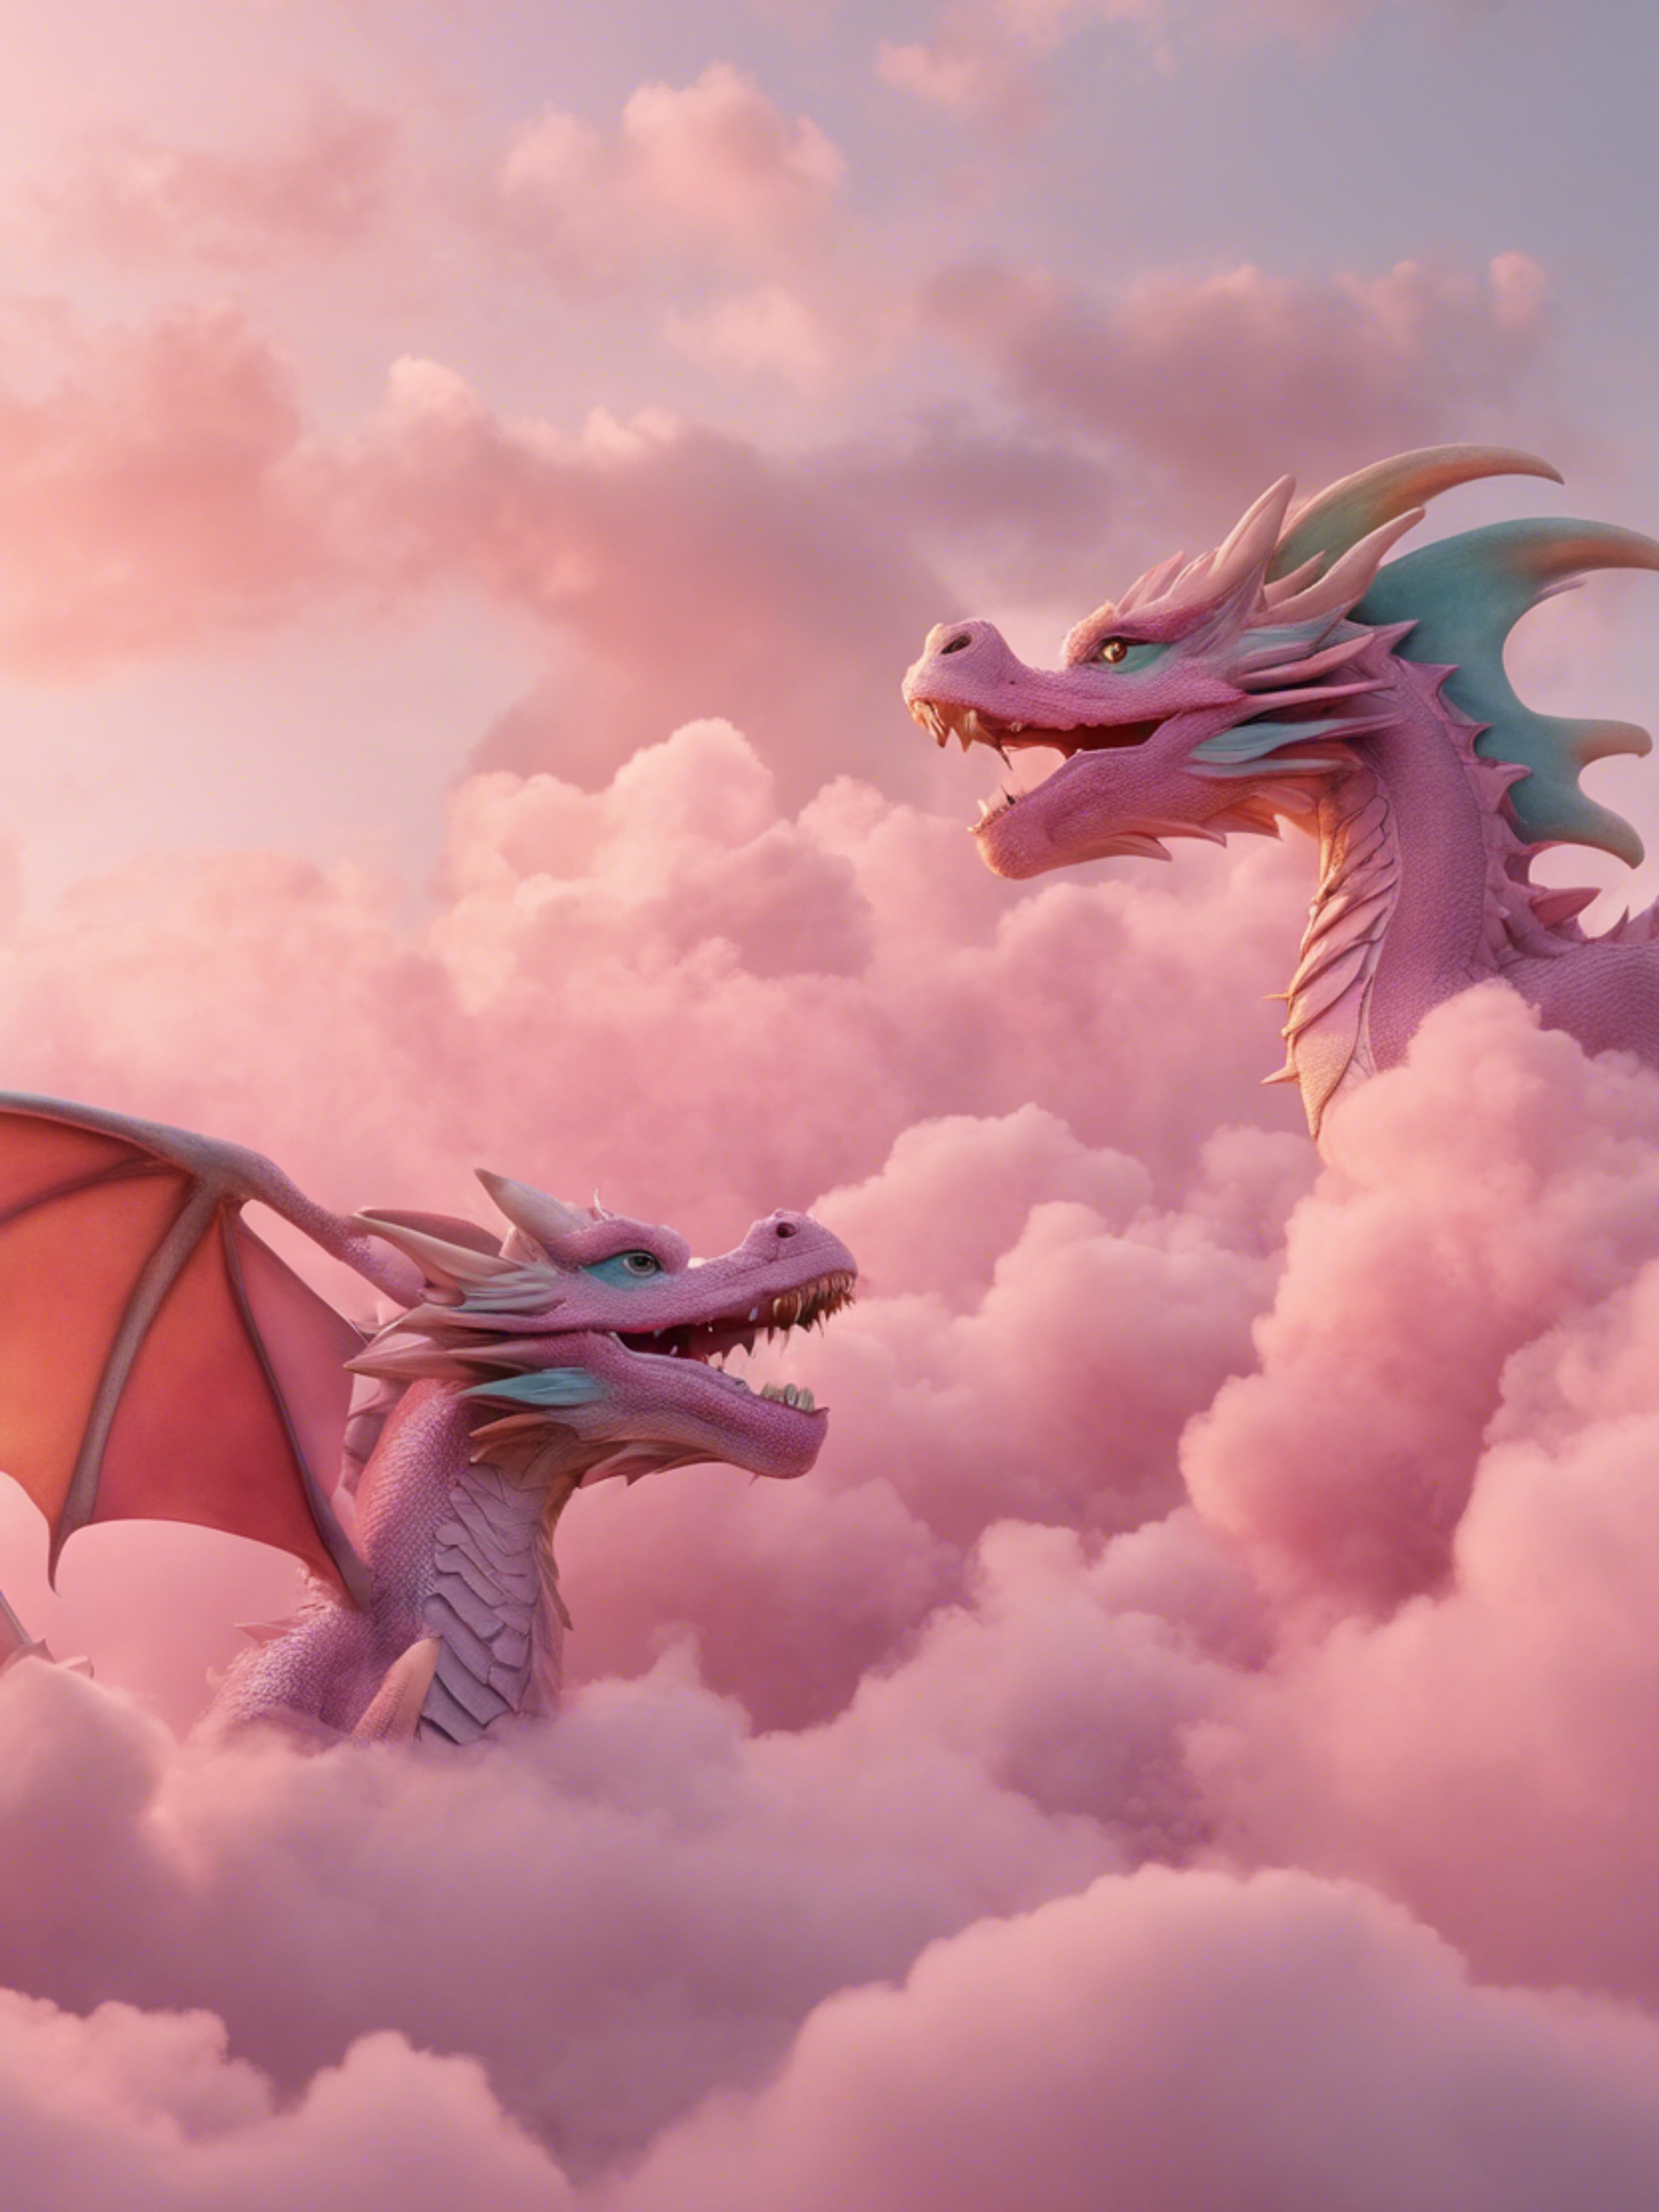 Trio of playful pastel-colored dragons flitting among fluffy pink clouds during sunrise. Tapéta[e1ca69721ca941939a18]